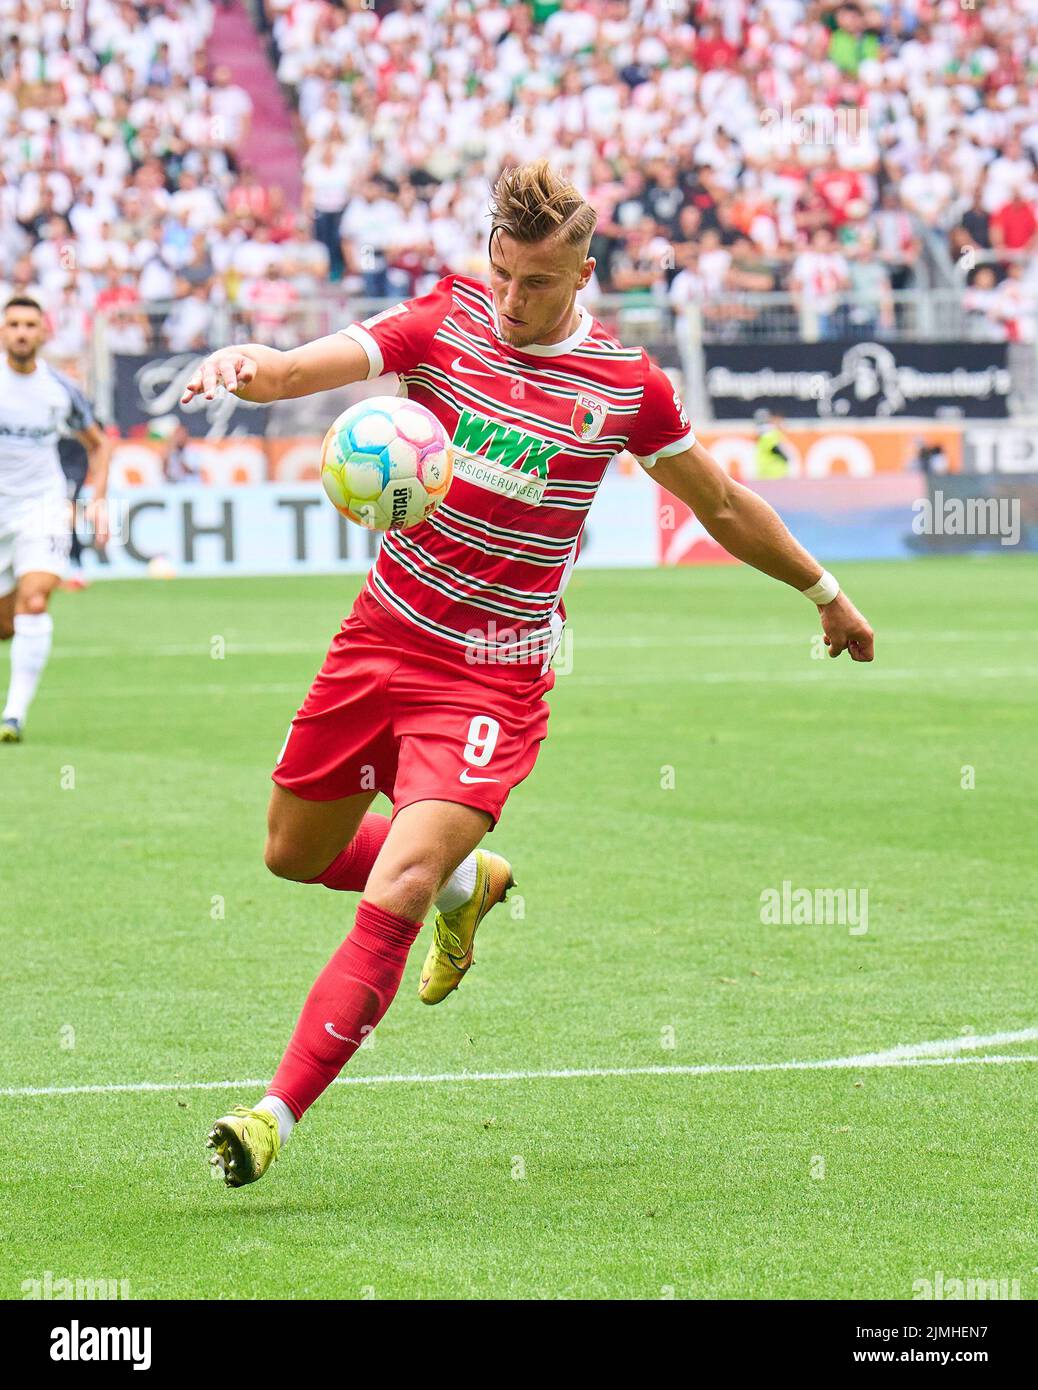 Ermedin Demirovic, FCA 9  in the match FC AUGSBURG - SC FREIBURG 0-4 1.German Football League on Aug 06, 2022 in Augsburg, Germany. Season 2022/2023, matchday 1, 1.Bundesliga, FCB, Munich, 1.Spieltag © Peter Schatz / Alamy Live News    - DFL REGULATIONS PROHIBIT ANY USE OF PHOTOGRAPHS as IMAGE SEQUENCES and/or QUASI-VIDEO - Stock Photo